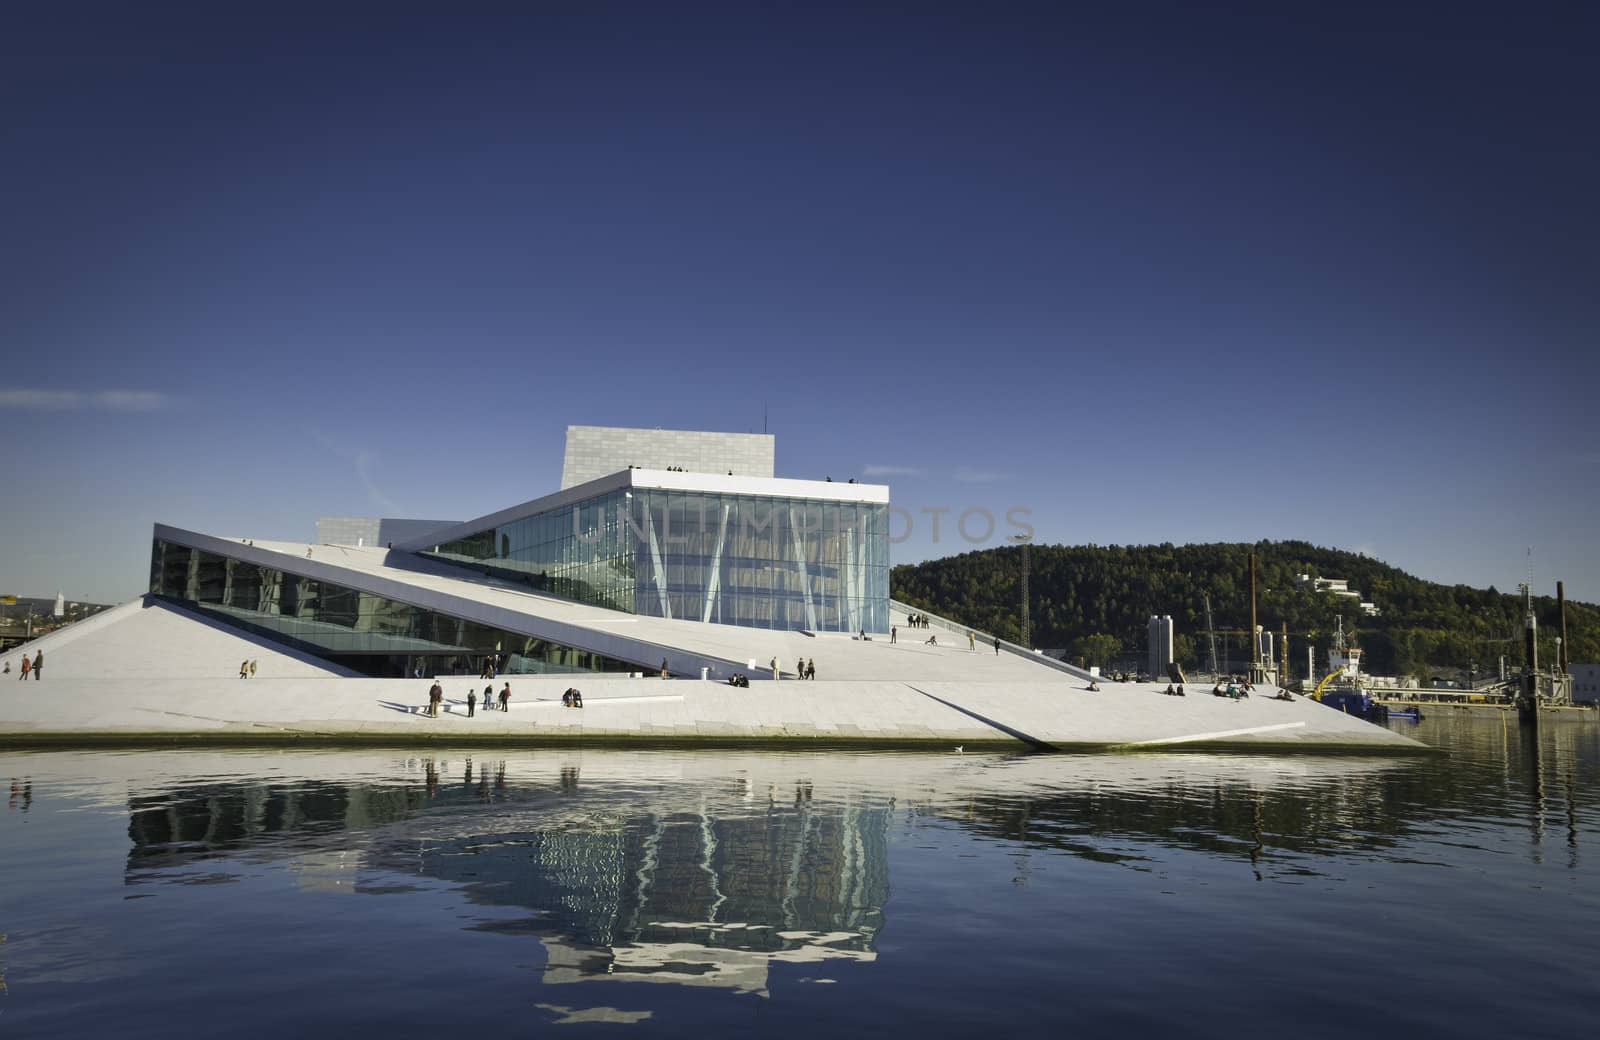 The new operahouse in Oslo, Norway. Building was finished 2008. The exteriors are built of marble and glass, and the roofs and exteriors are open for the public.